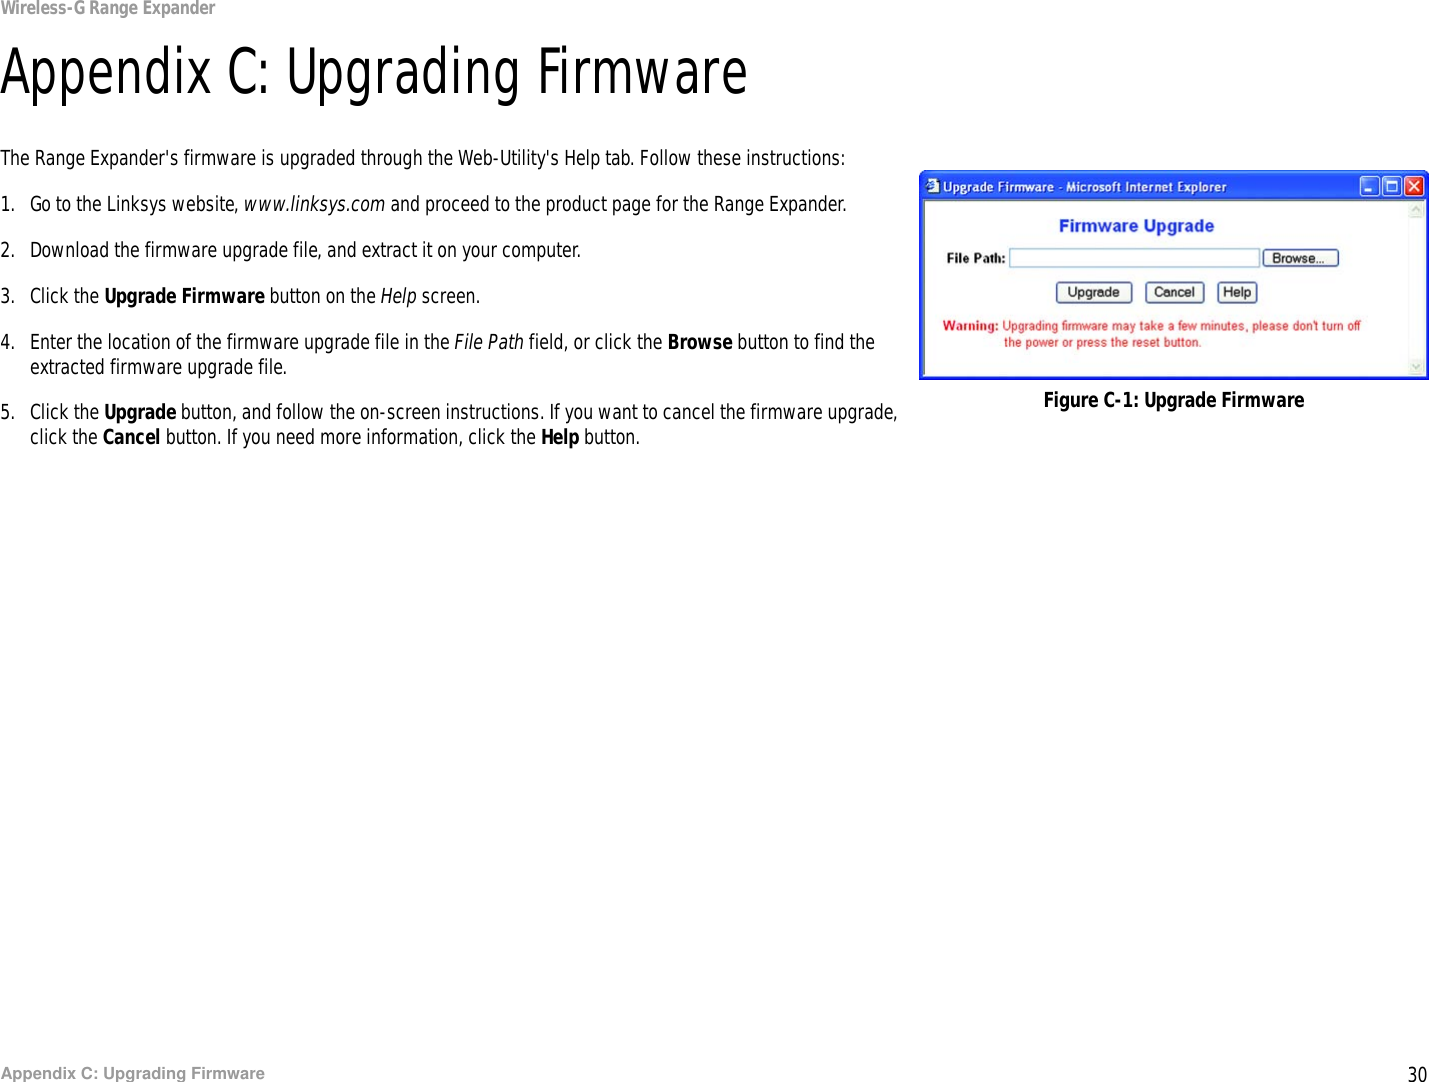 30Appendix C: Upgrading FirmwareWireless-G Range ExpanderAppendix C: Upgrading FirmwareThe Range Expander&apos;s firmware is upgraded through the Web-Utility&apos;s Help tab. Follow these instructions:1. Go to the Linksys website, www.linksys.com and proceed to the product page for the Range Expander.2. Download the firmware upgrade file, and extract it on your computer.3. Click the Upgrade Firmware button on the Help screen.4. Enter the location of the firmware upgrade file in the File Path field, or click the Browse button to find the extracted firmware upgrade file.5. Click the Upgrade button, and follow the on-screen instructions. If you want to cancel the firmware upgrade, click the Cancel button. If you need more information, click the Help button.Figure C-1: Upgrade Firmware